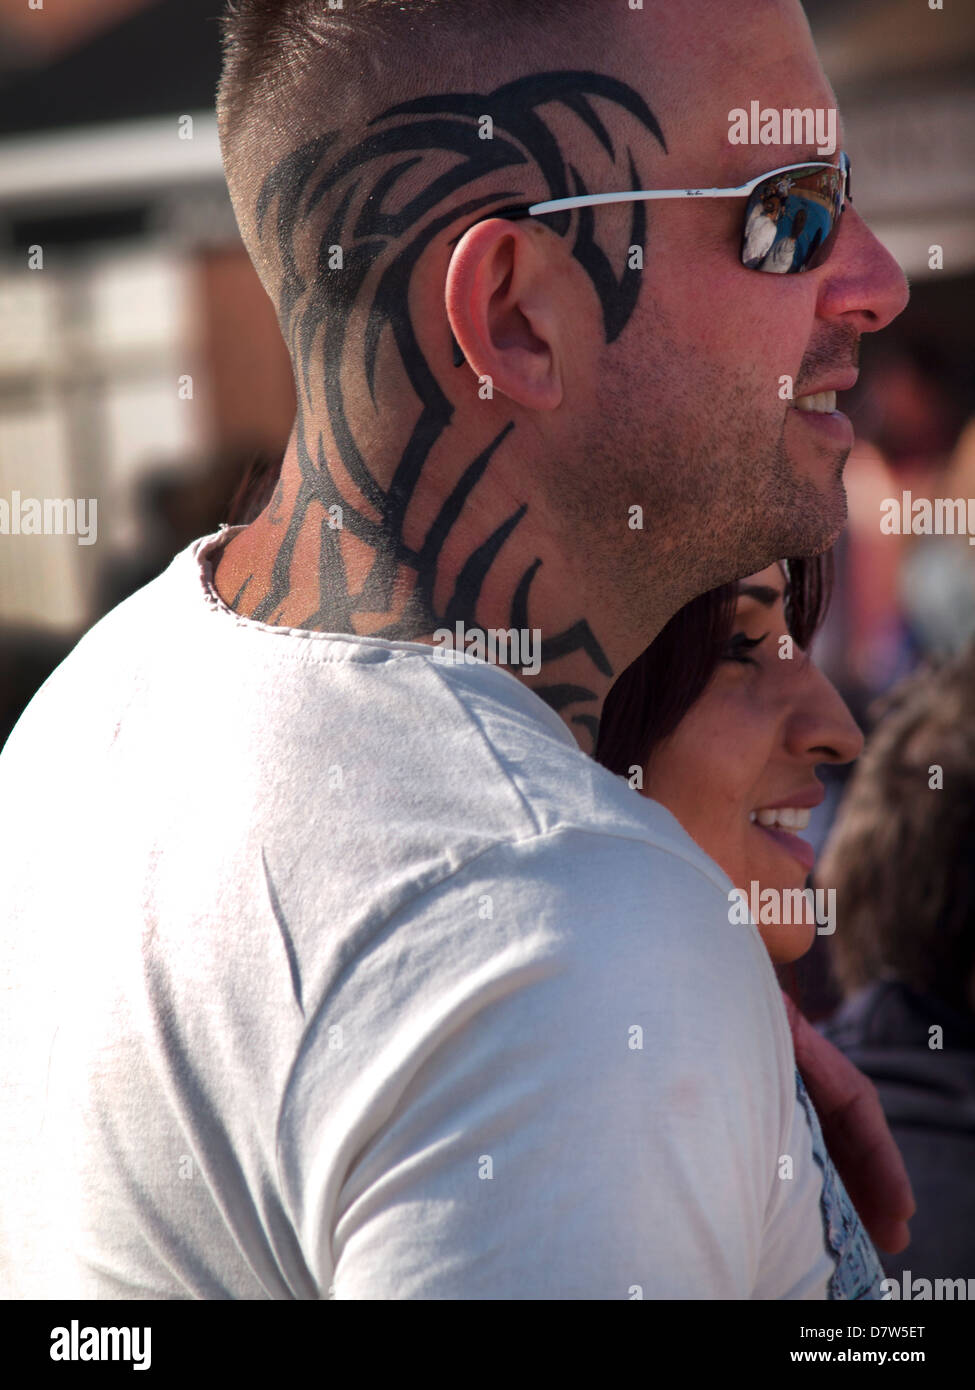 Tribal pattern tattoos on the back of a man's head Stock Photo